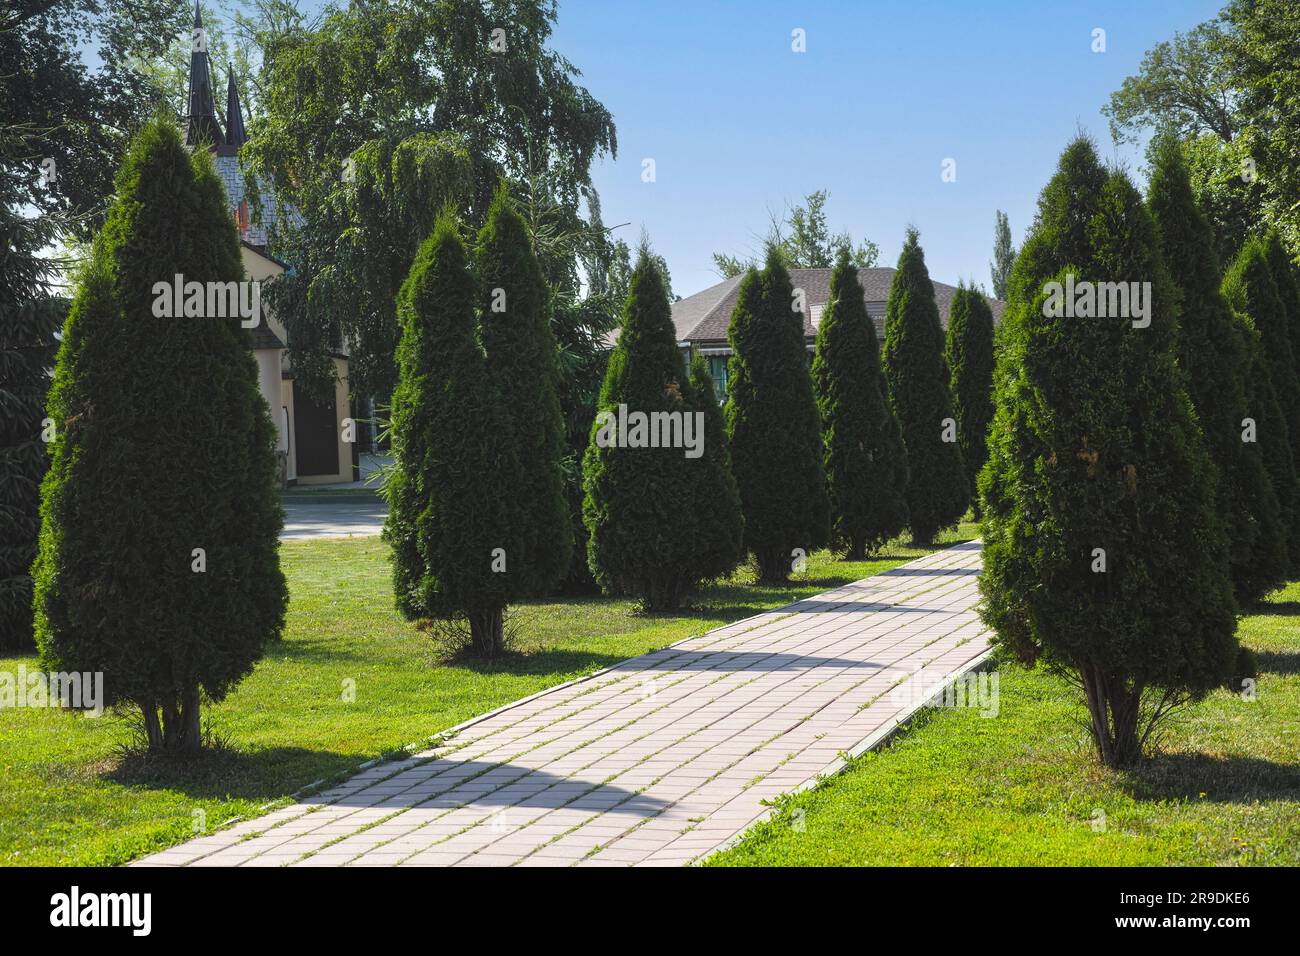 Thuja trees growing along the side of a tiled path in the park. Stock Photo